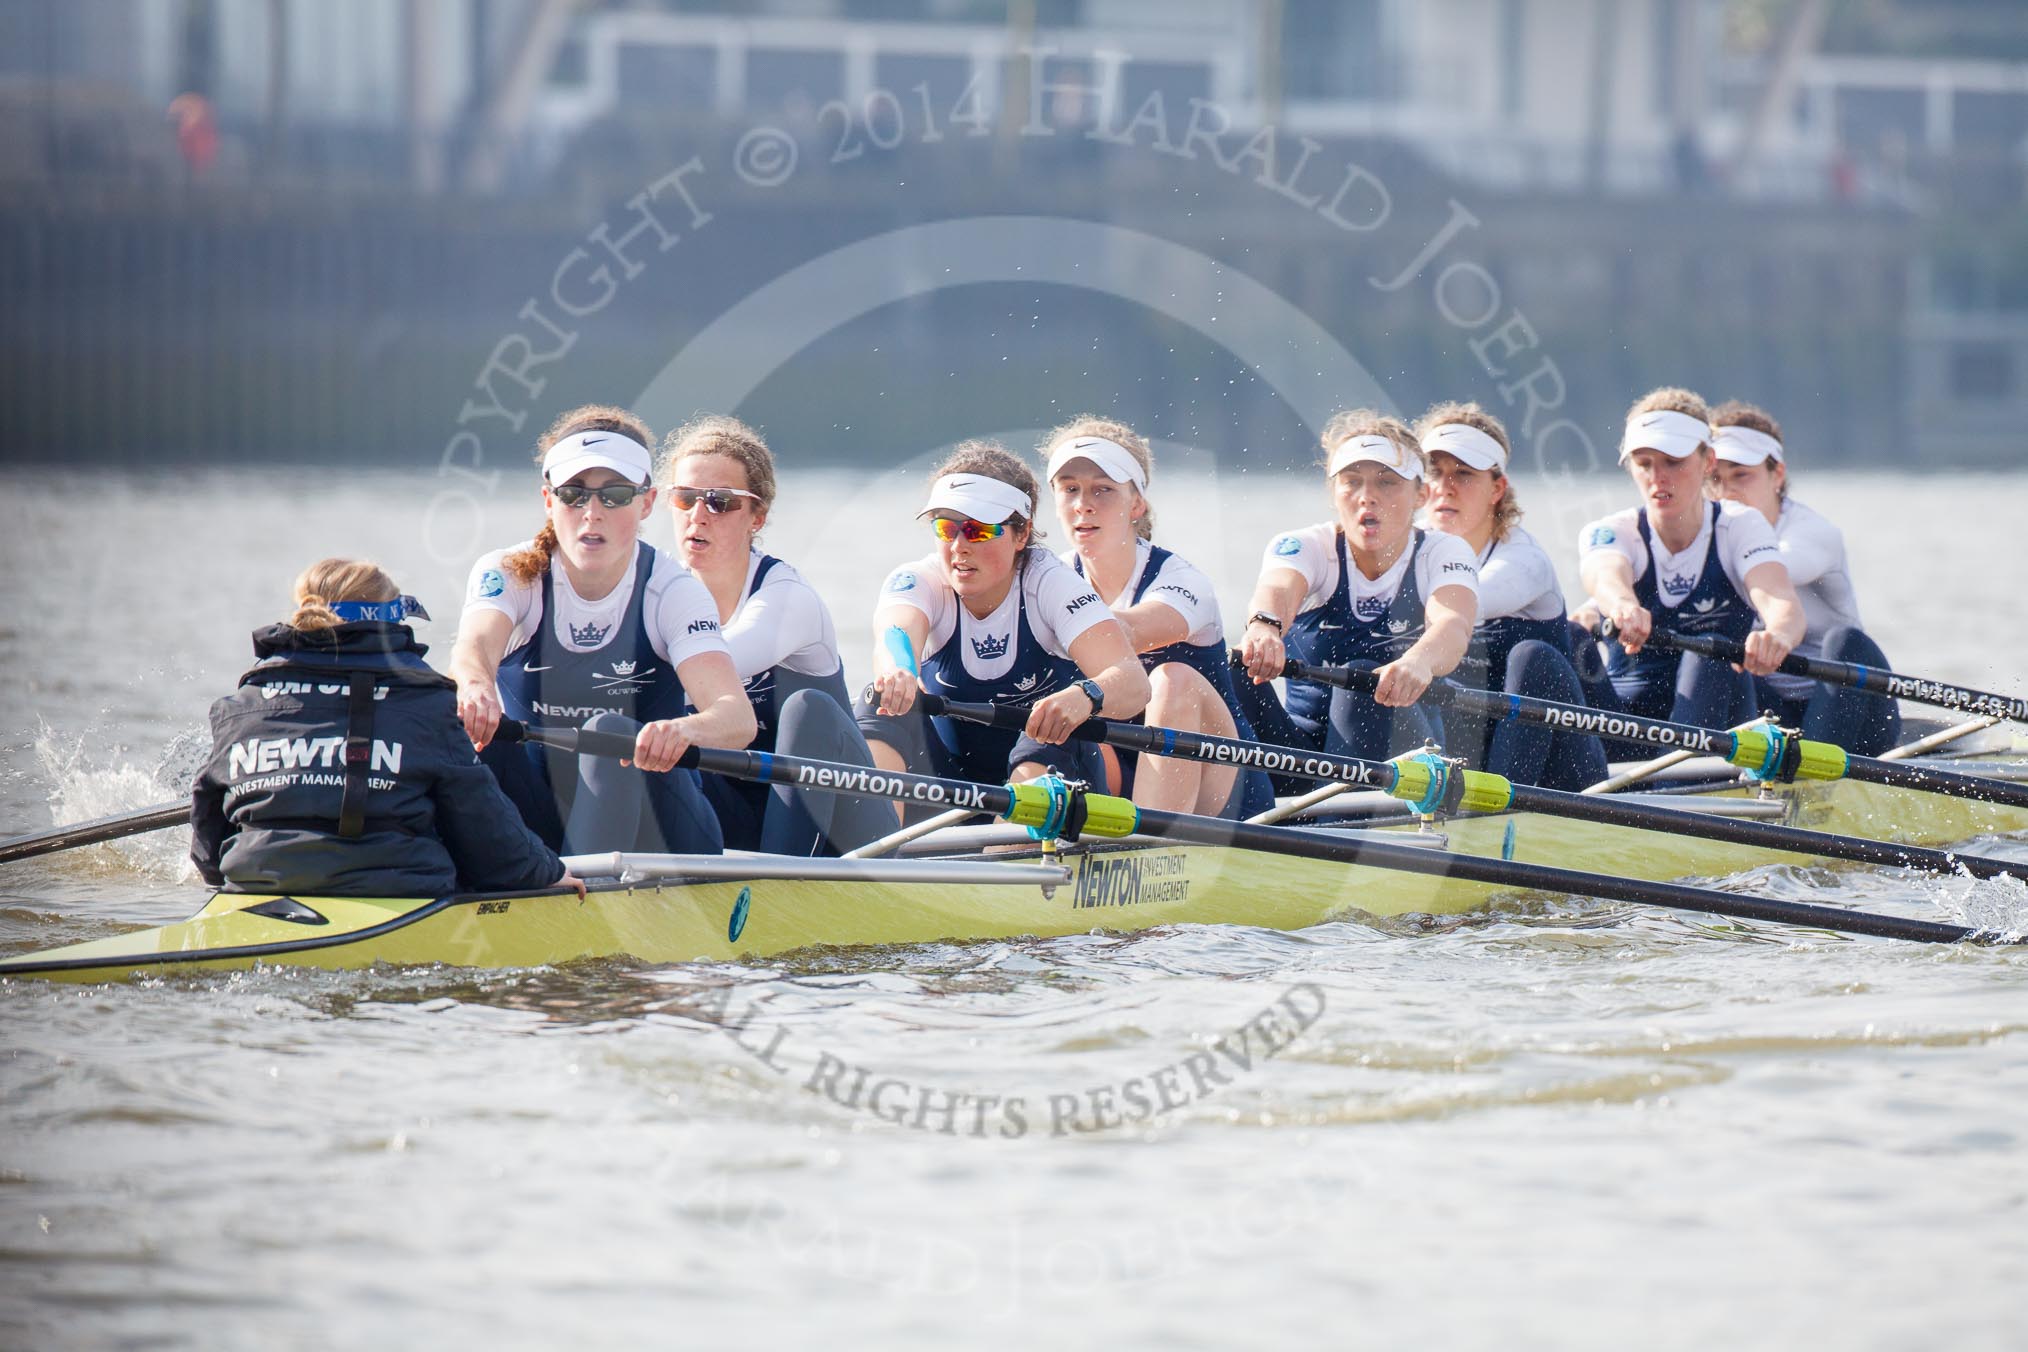 The Boat Race season 2014 - fixture OUWBC vs Molesey BC.




on 01 March 2014 at 12:32, image #61